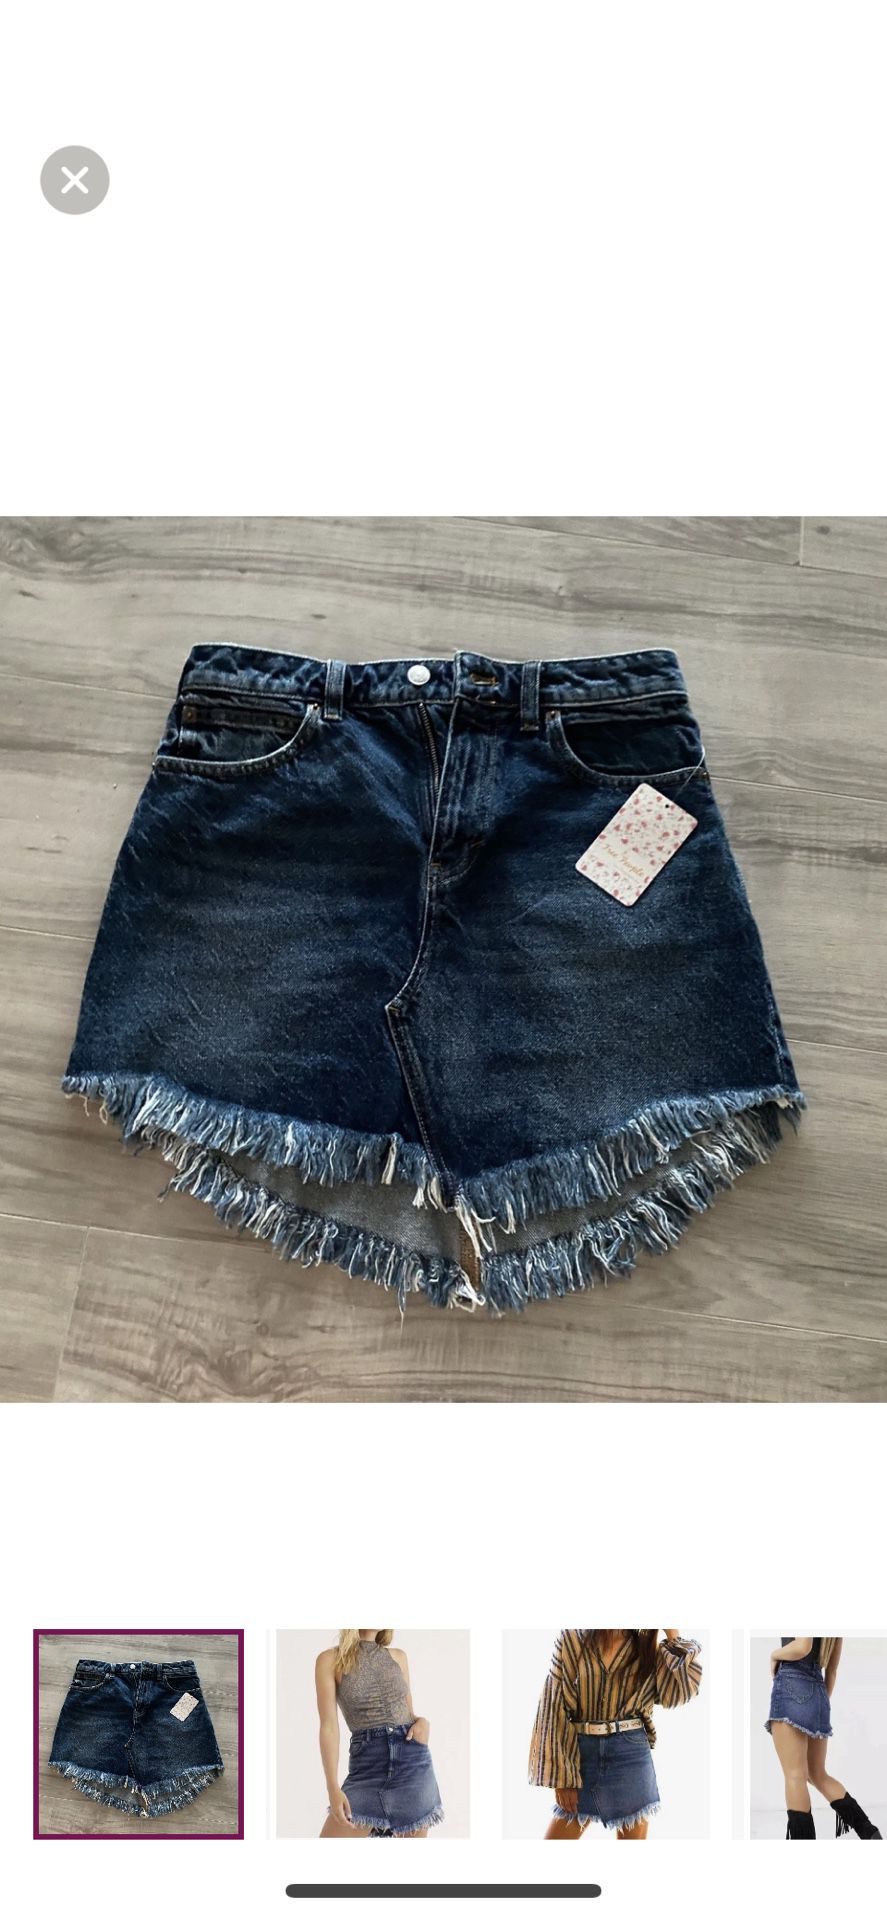 Free people denim fringe skirt size 26 dark blue new with tags concert country